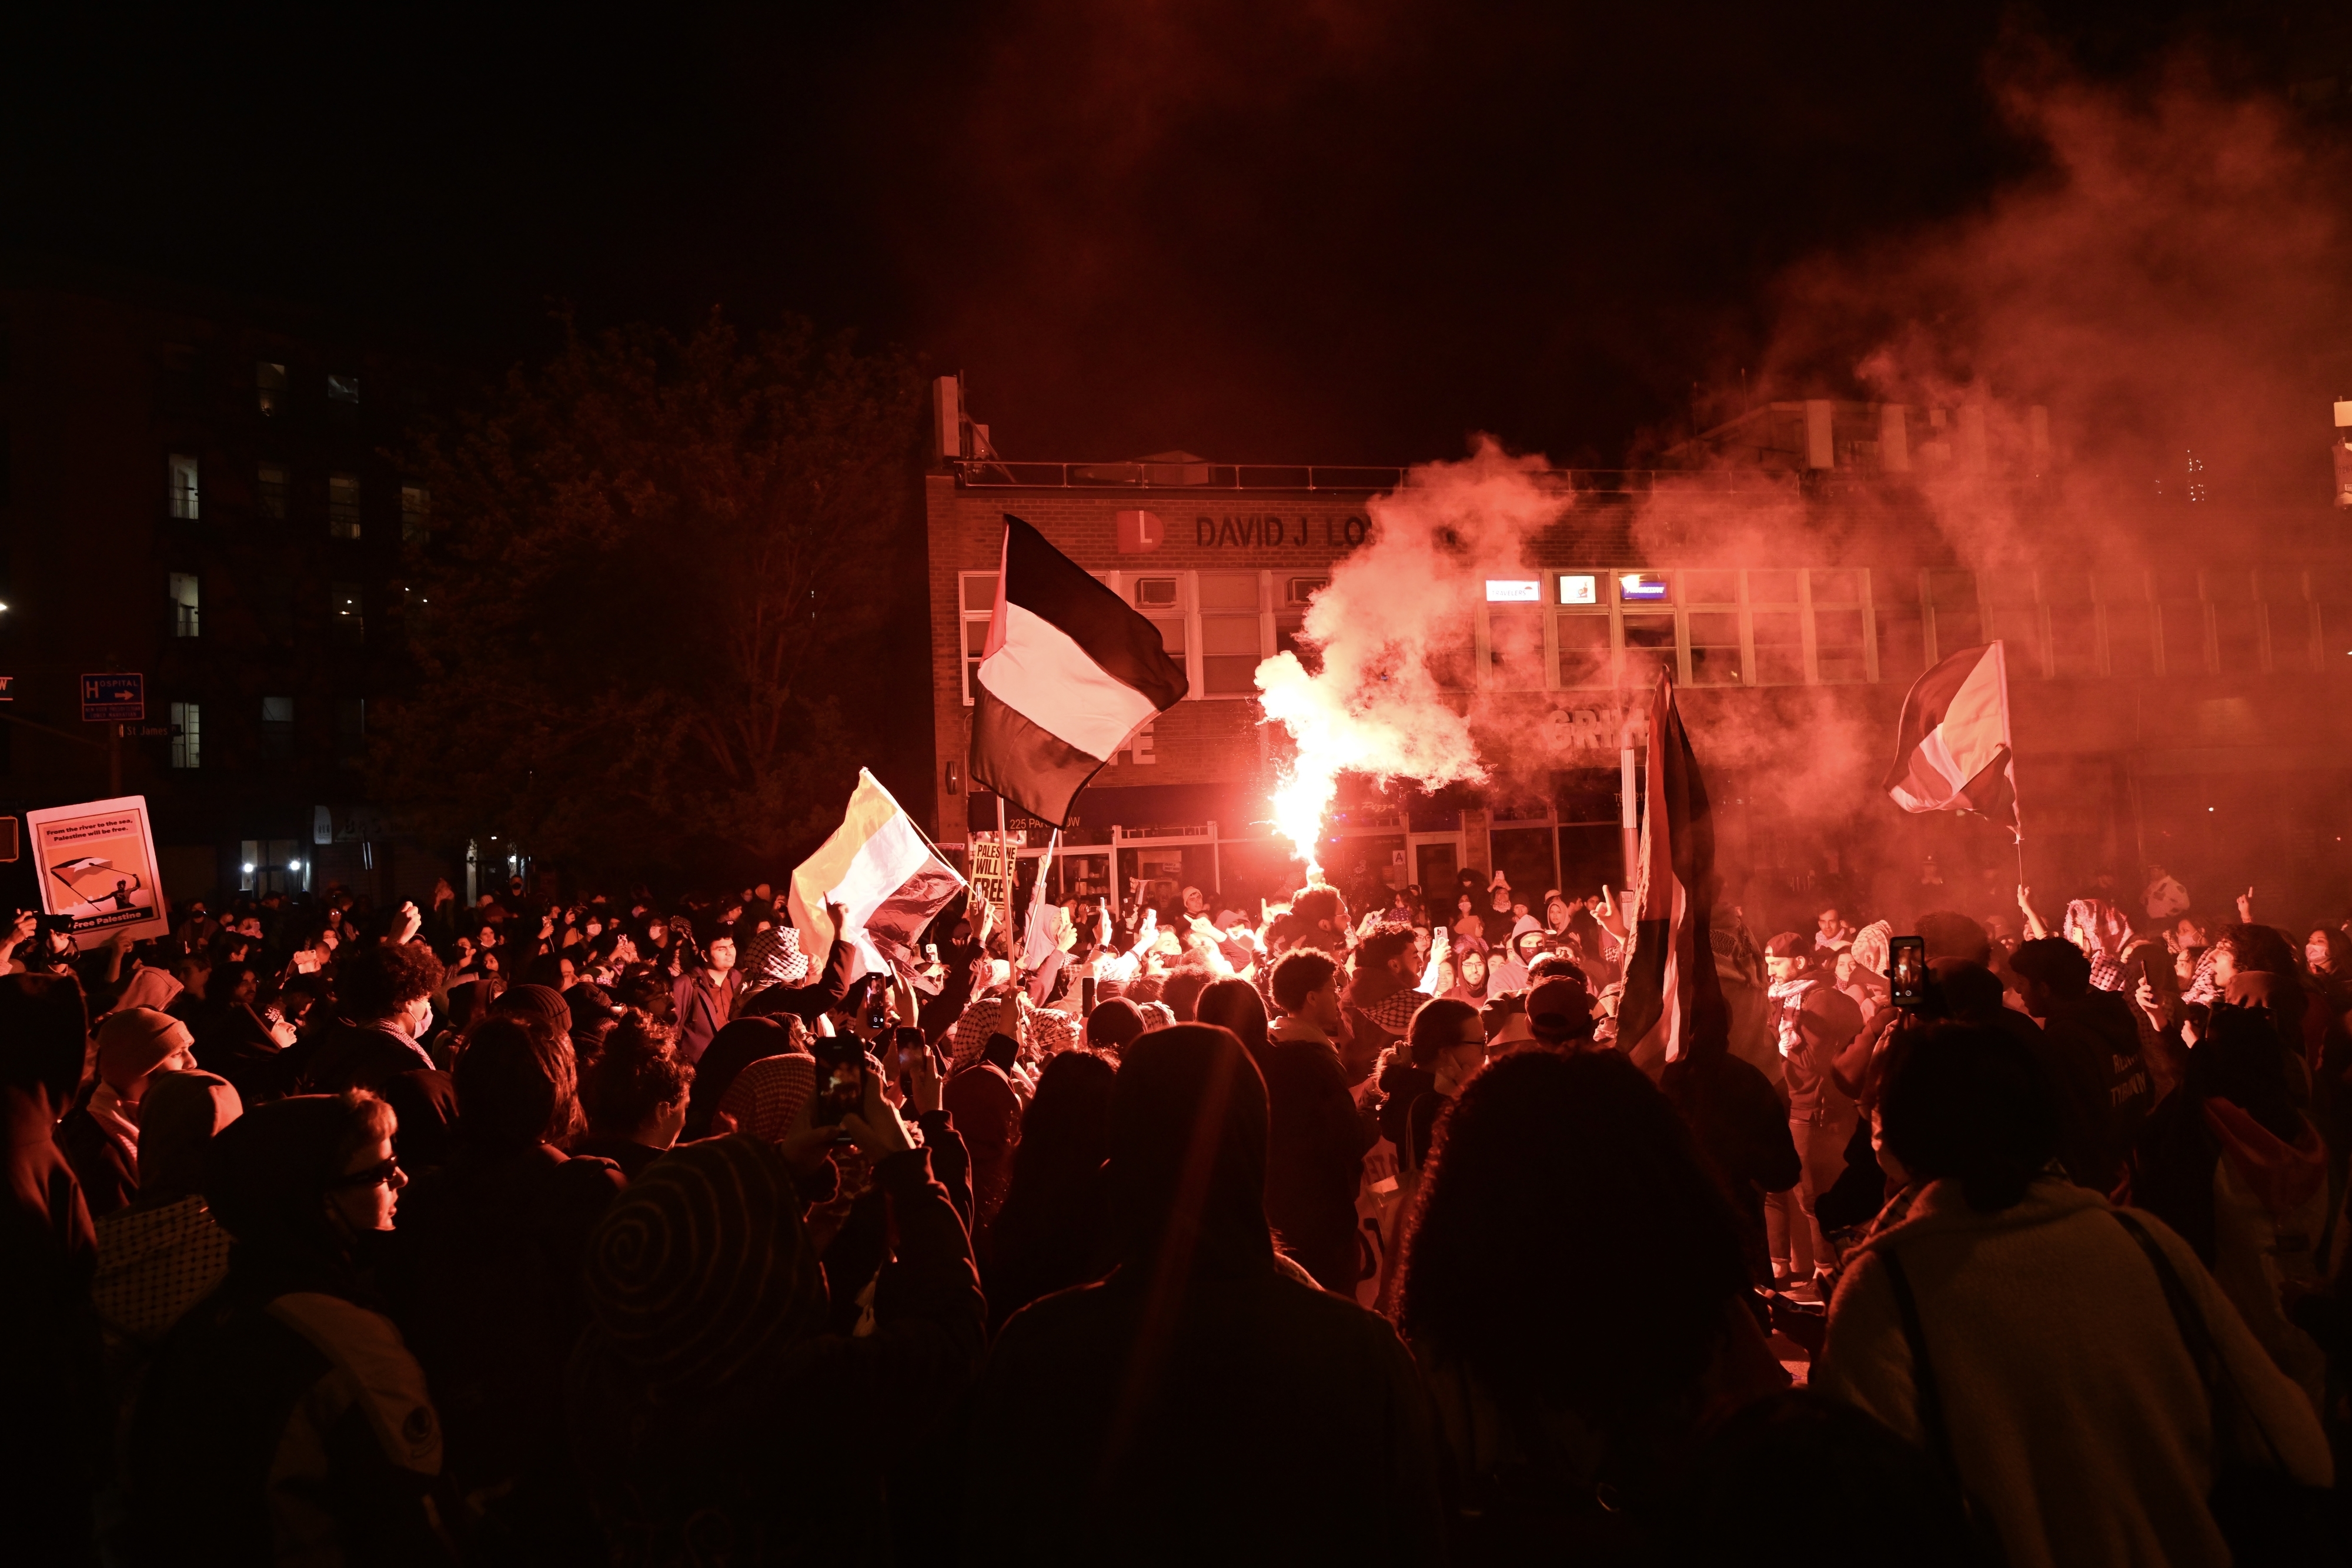 Crowd of people with flags and flares at a nighttime outdoor gathering